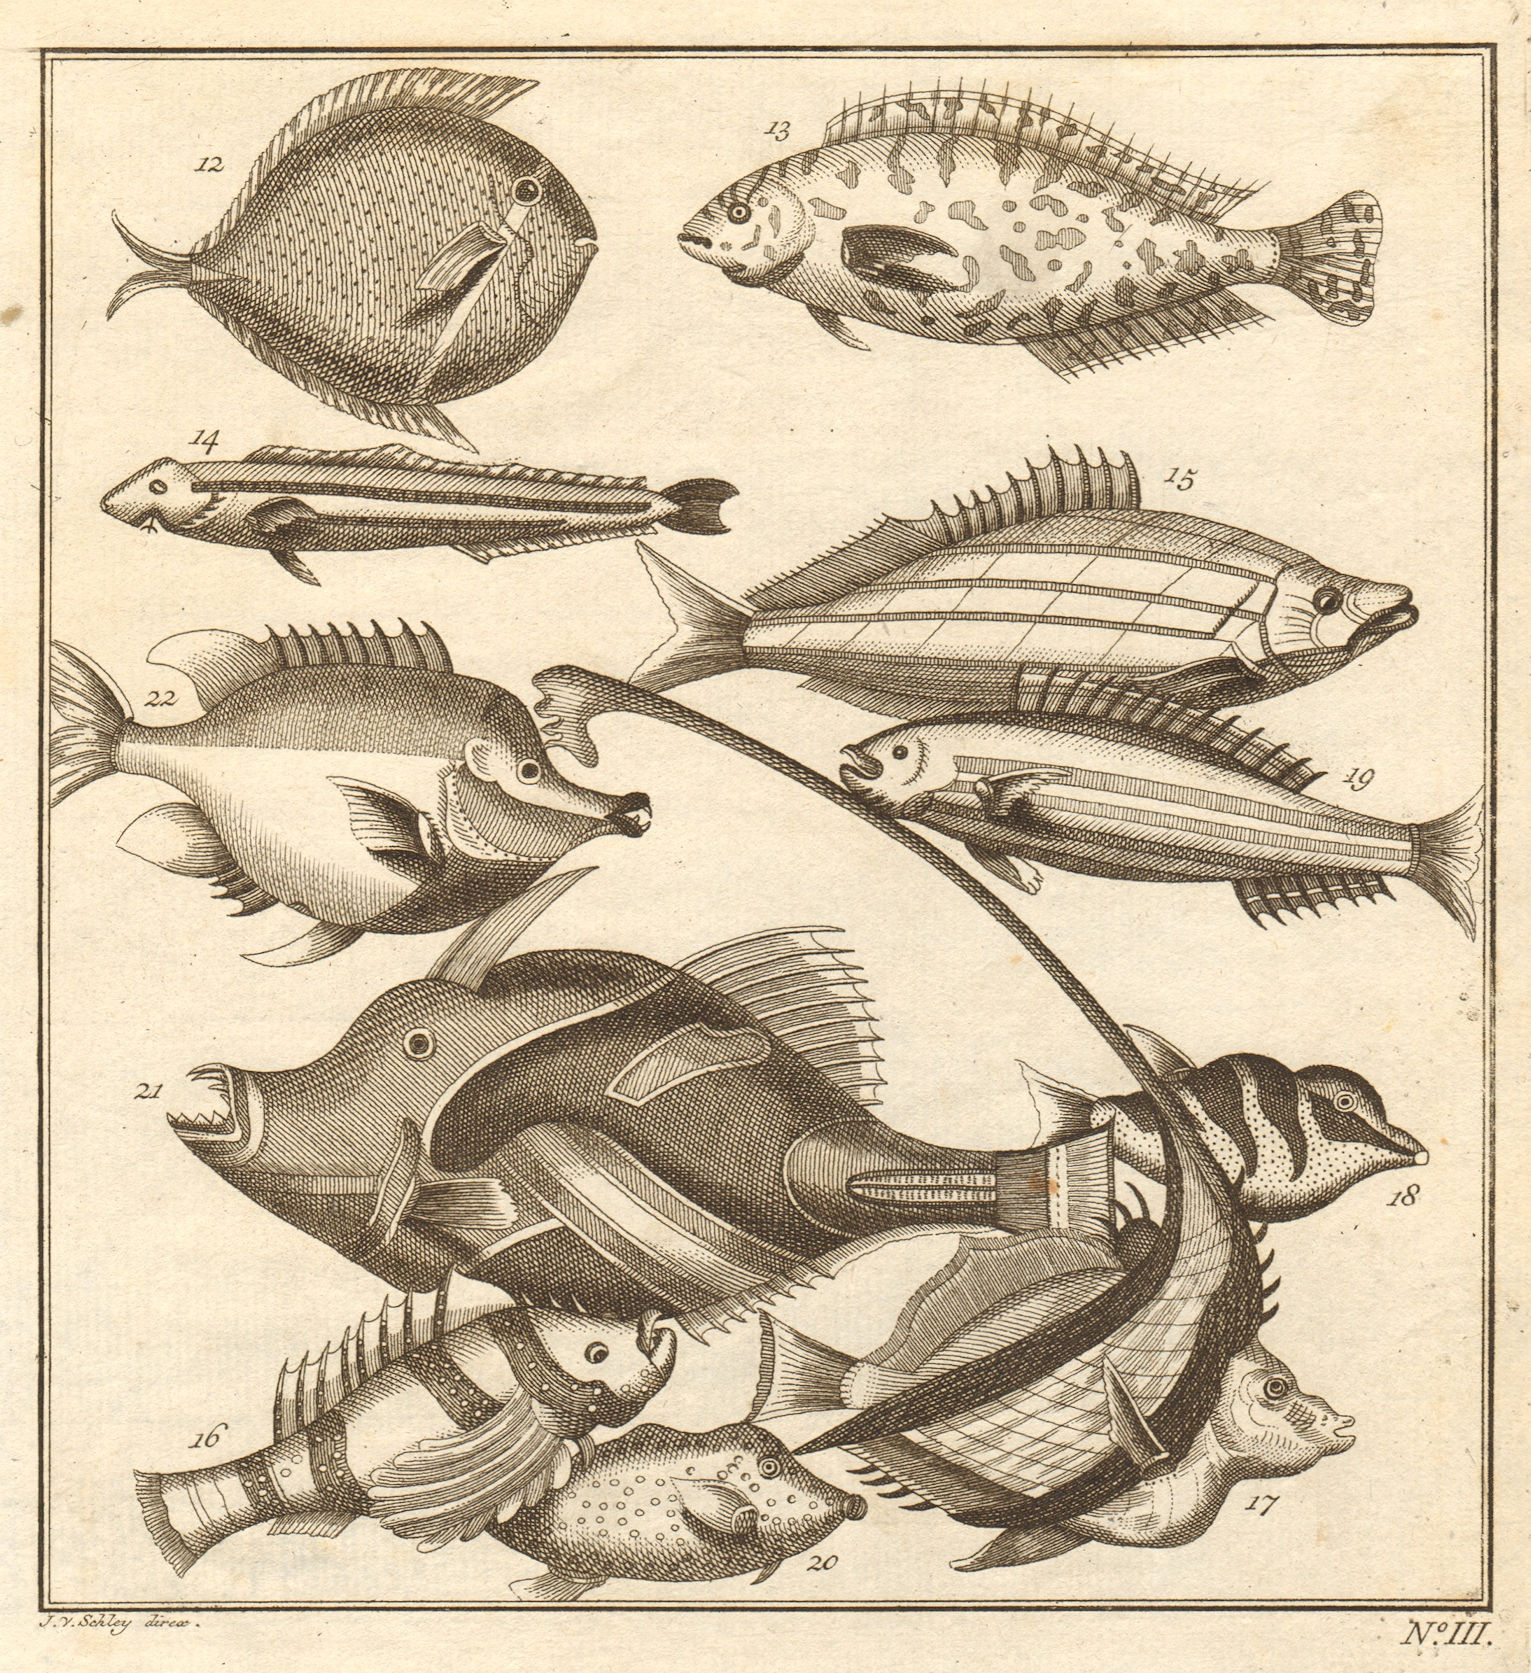 Associate Product III. Poissons d'Ambione. Indonesia Moluccas Maluku tropical fish. SCHLEY 1763